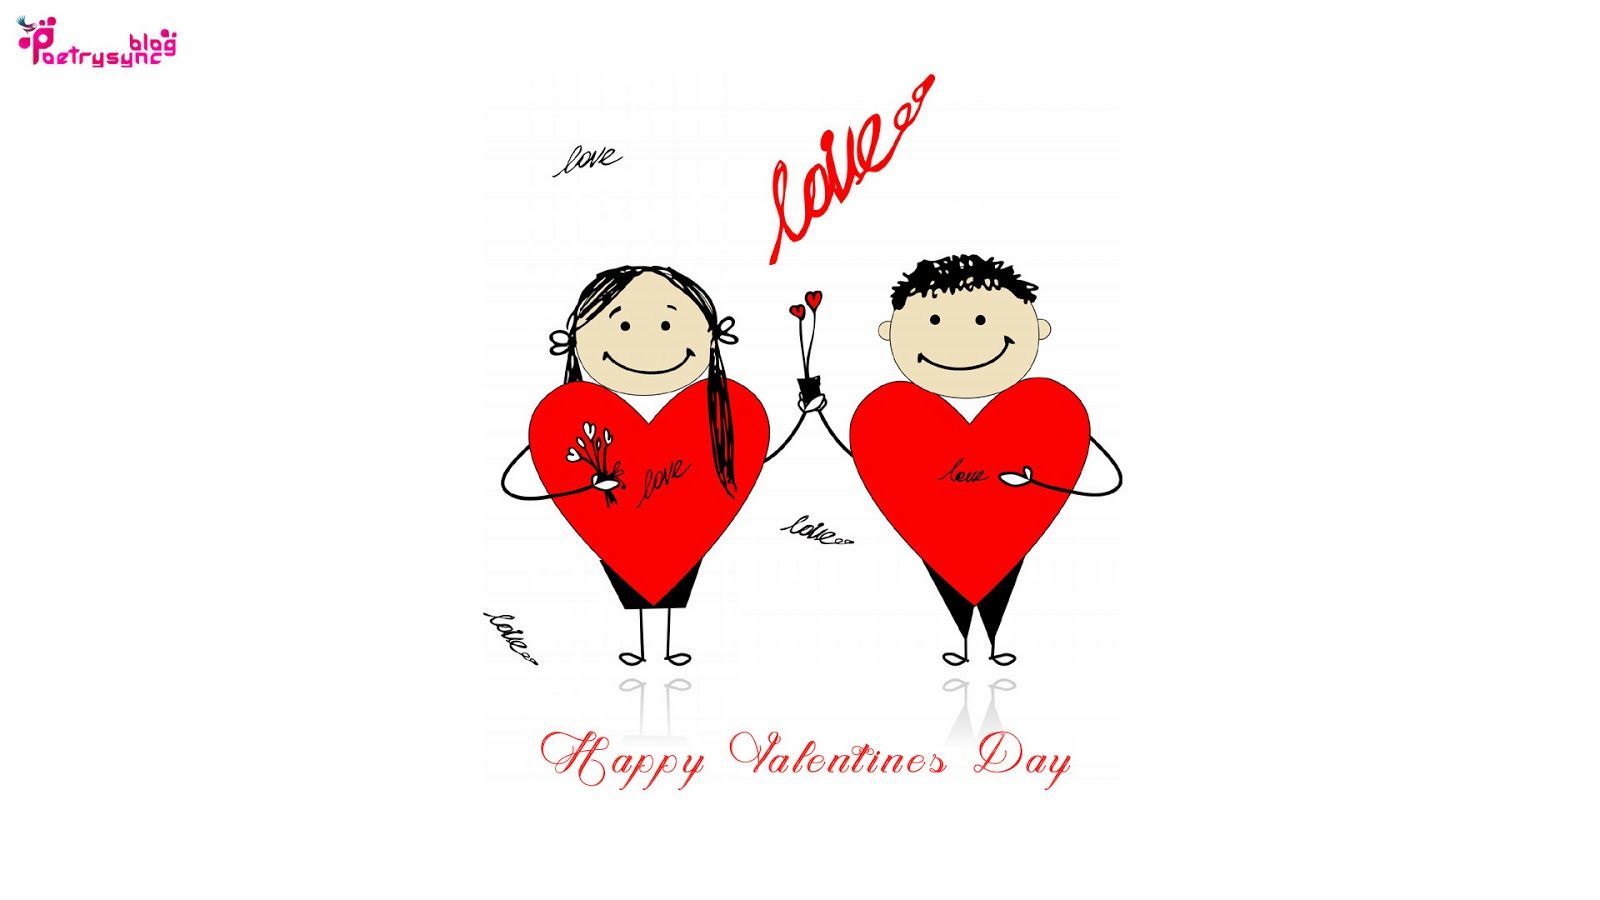 Happy Valentines Day Cartoons Couple Desktop Background Wallpaper Red Love Hearts Lovers Day. Happy valentines day sms, Happy valentines day, Happy valentine